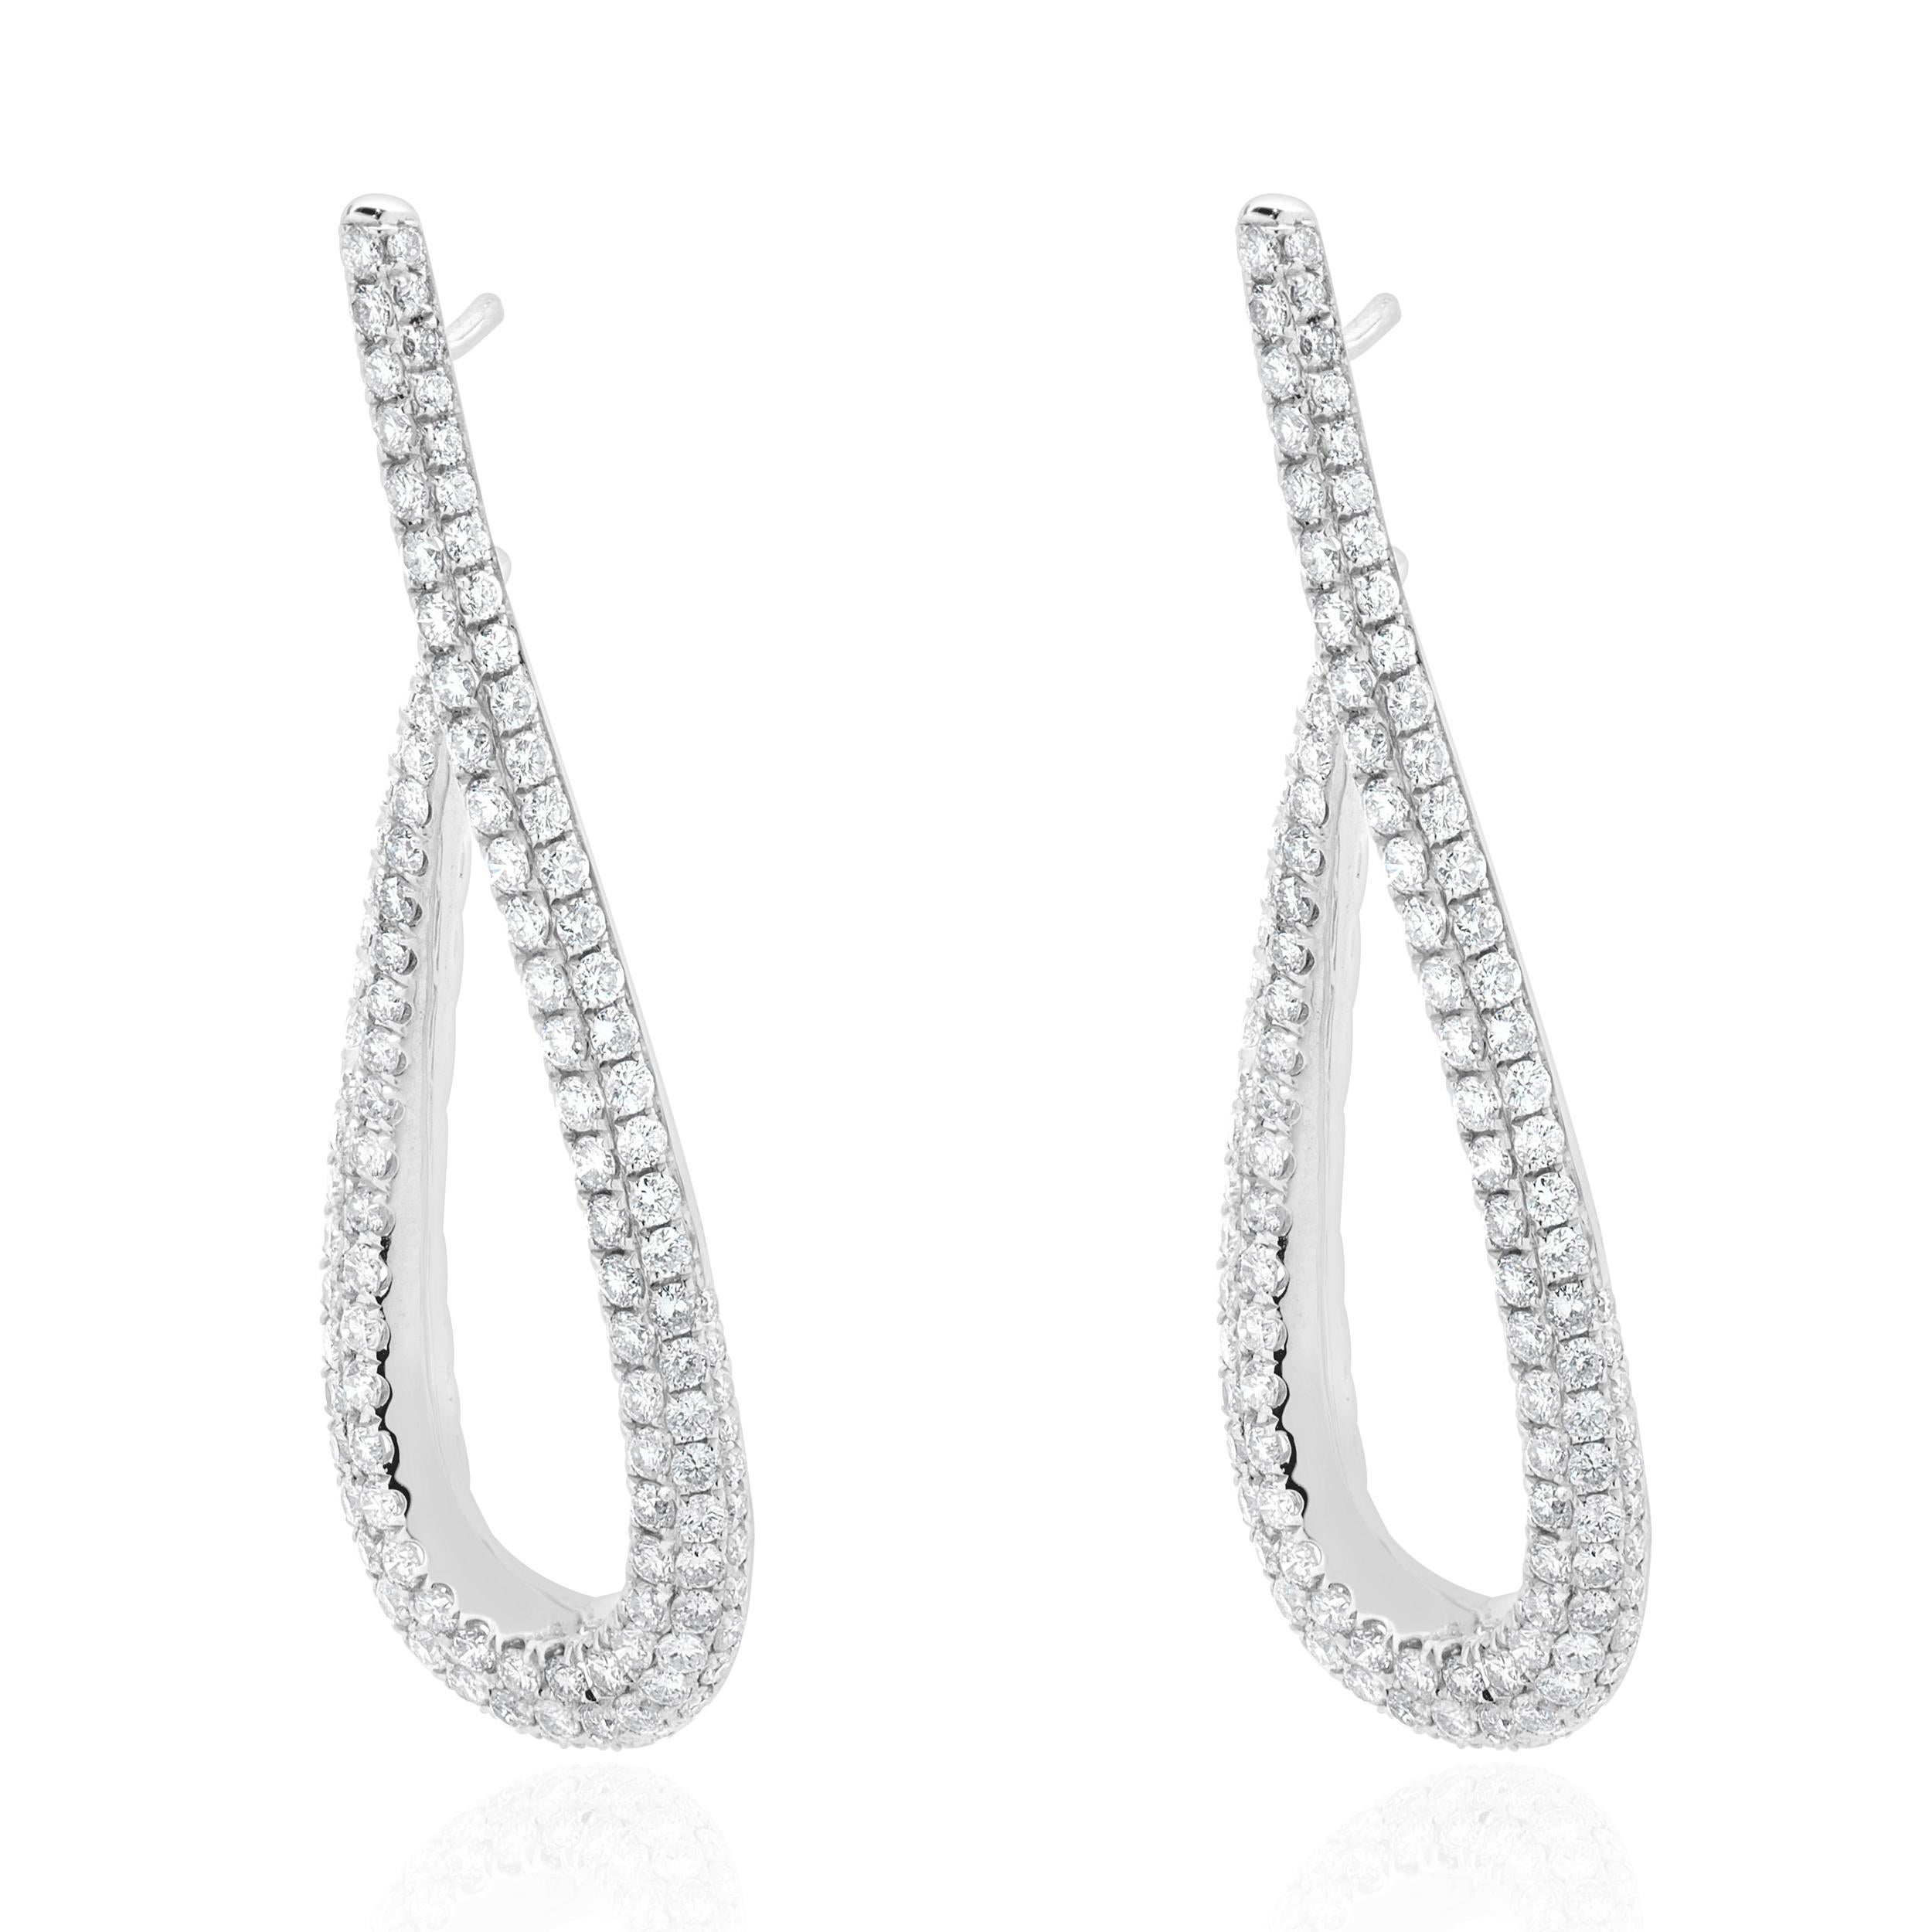 Designer: custom design
Material: 18K white gold
Diamonds: 234 round brilliant cut = 4.25cttw
Color: F
Clarity: VS2
Dimensions: earrings measure 60mm in length
Weight: 10.20 grams
